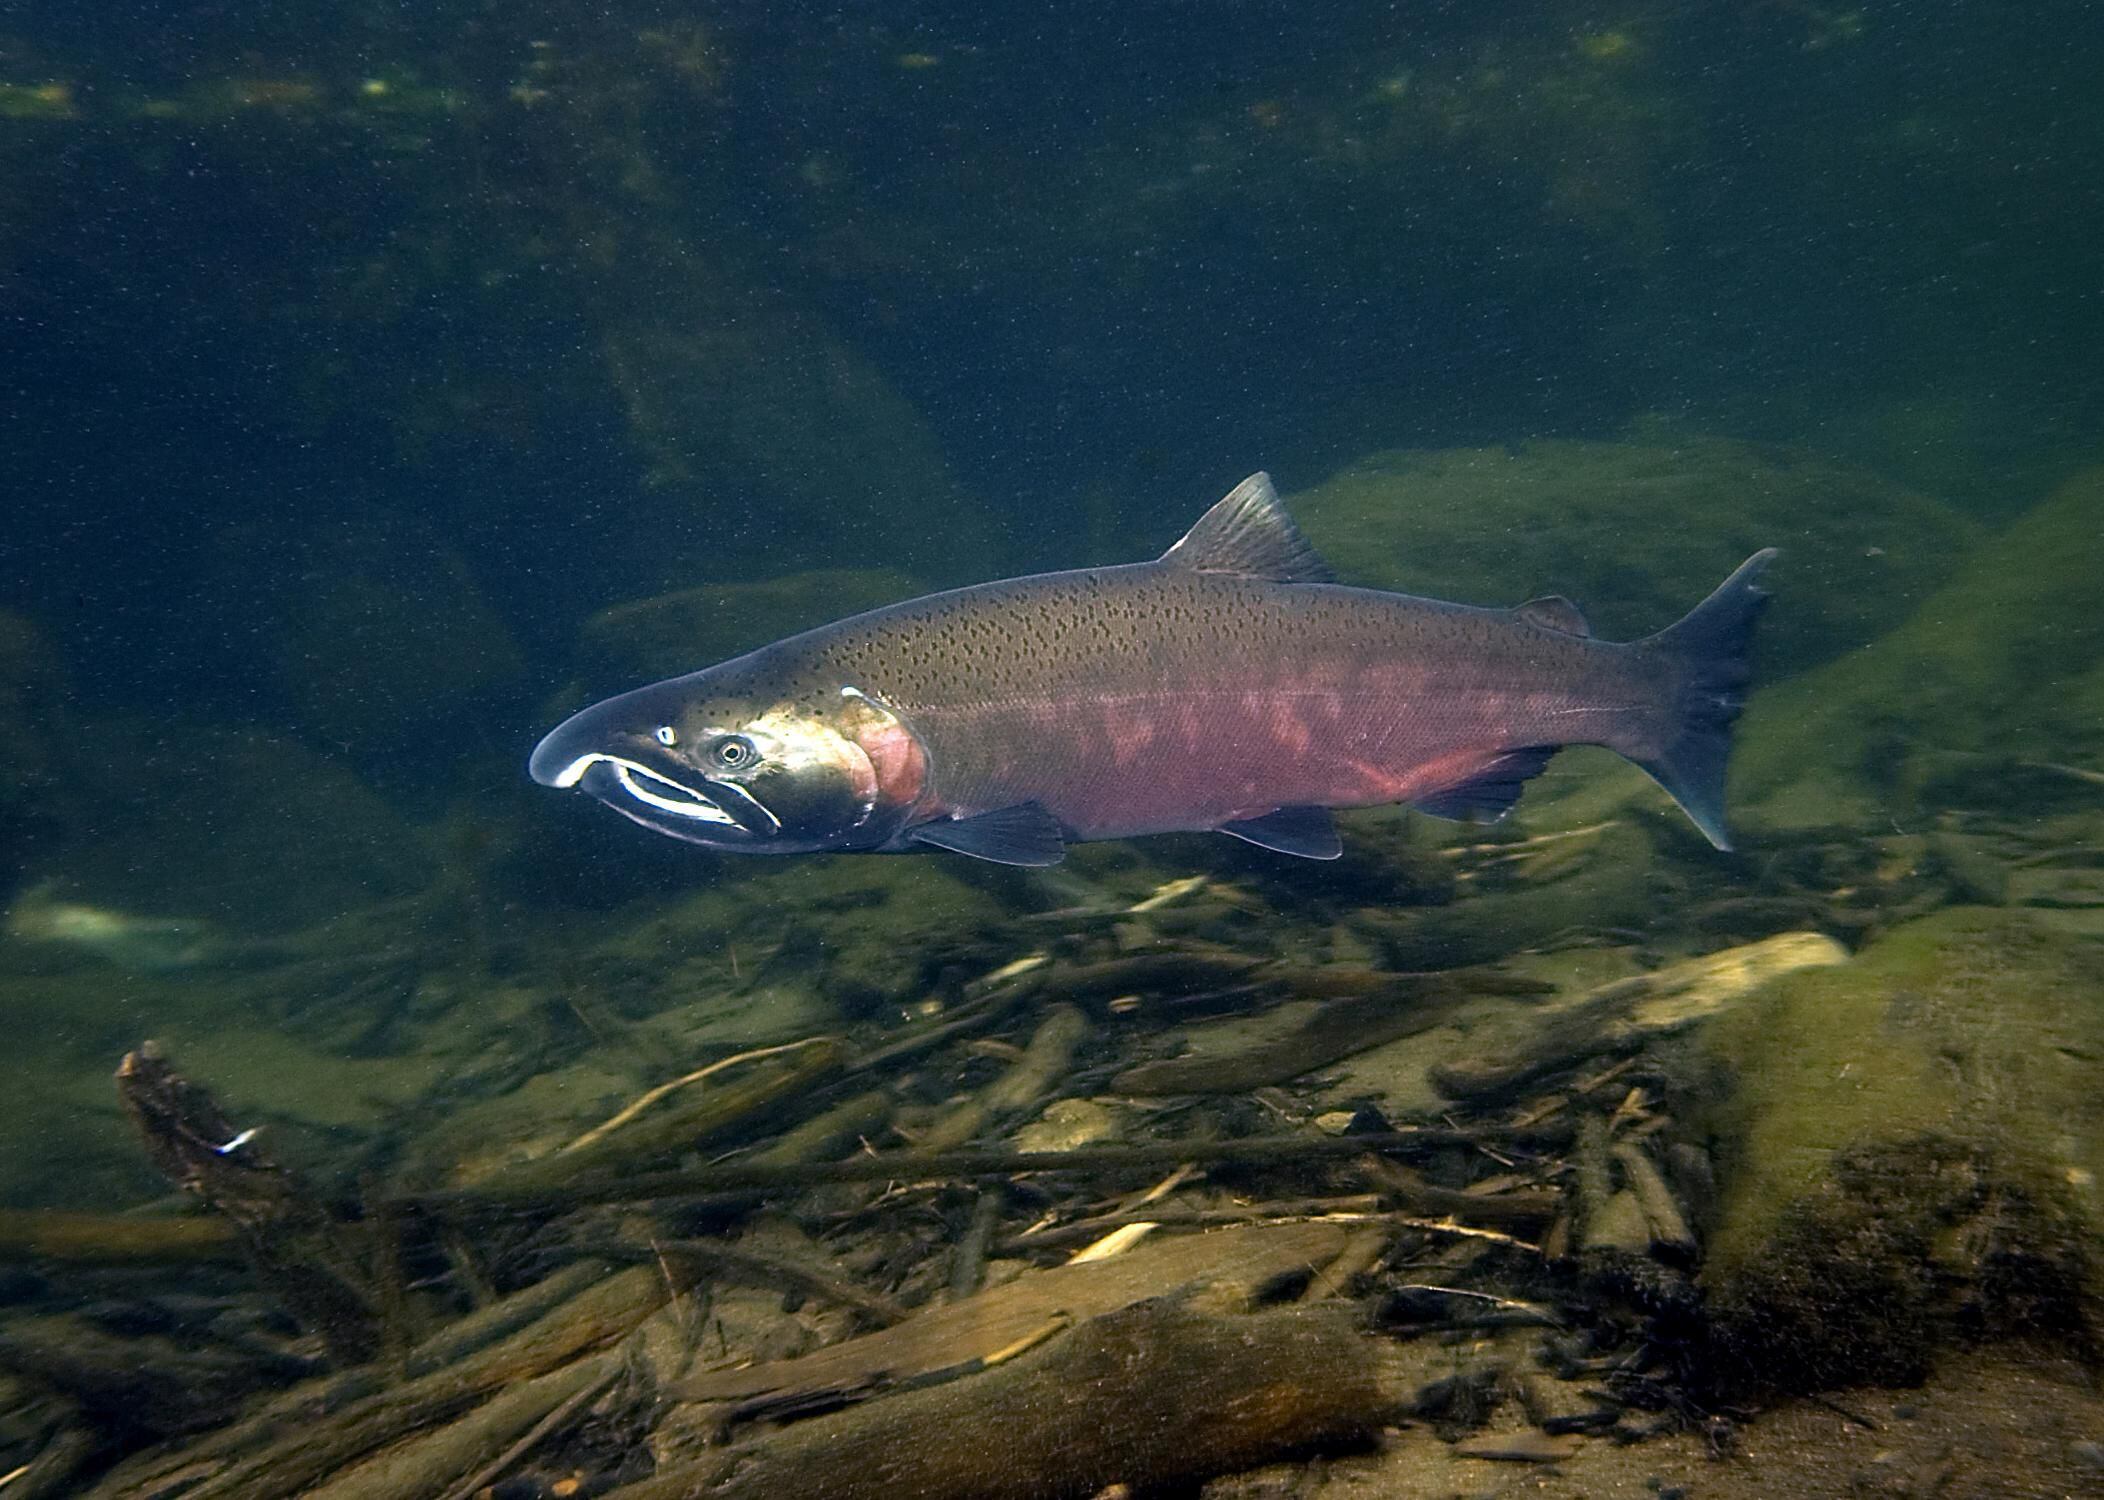 Oregon settles lawsuit over salmon protections near logging sites - OPB